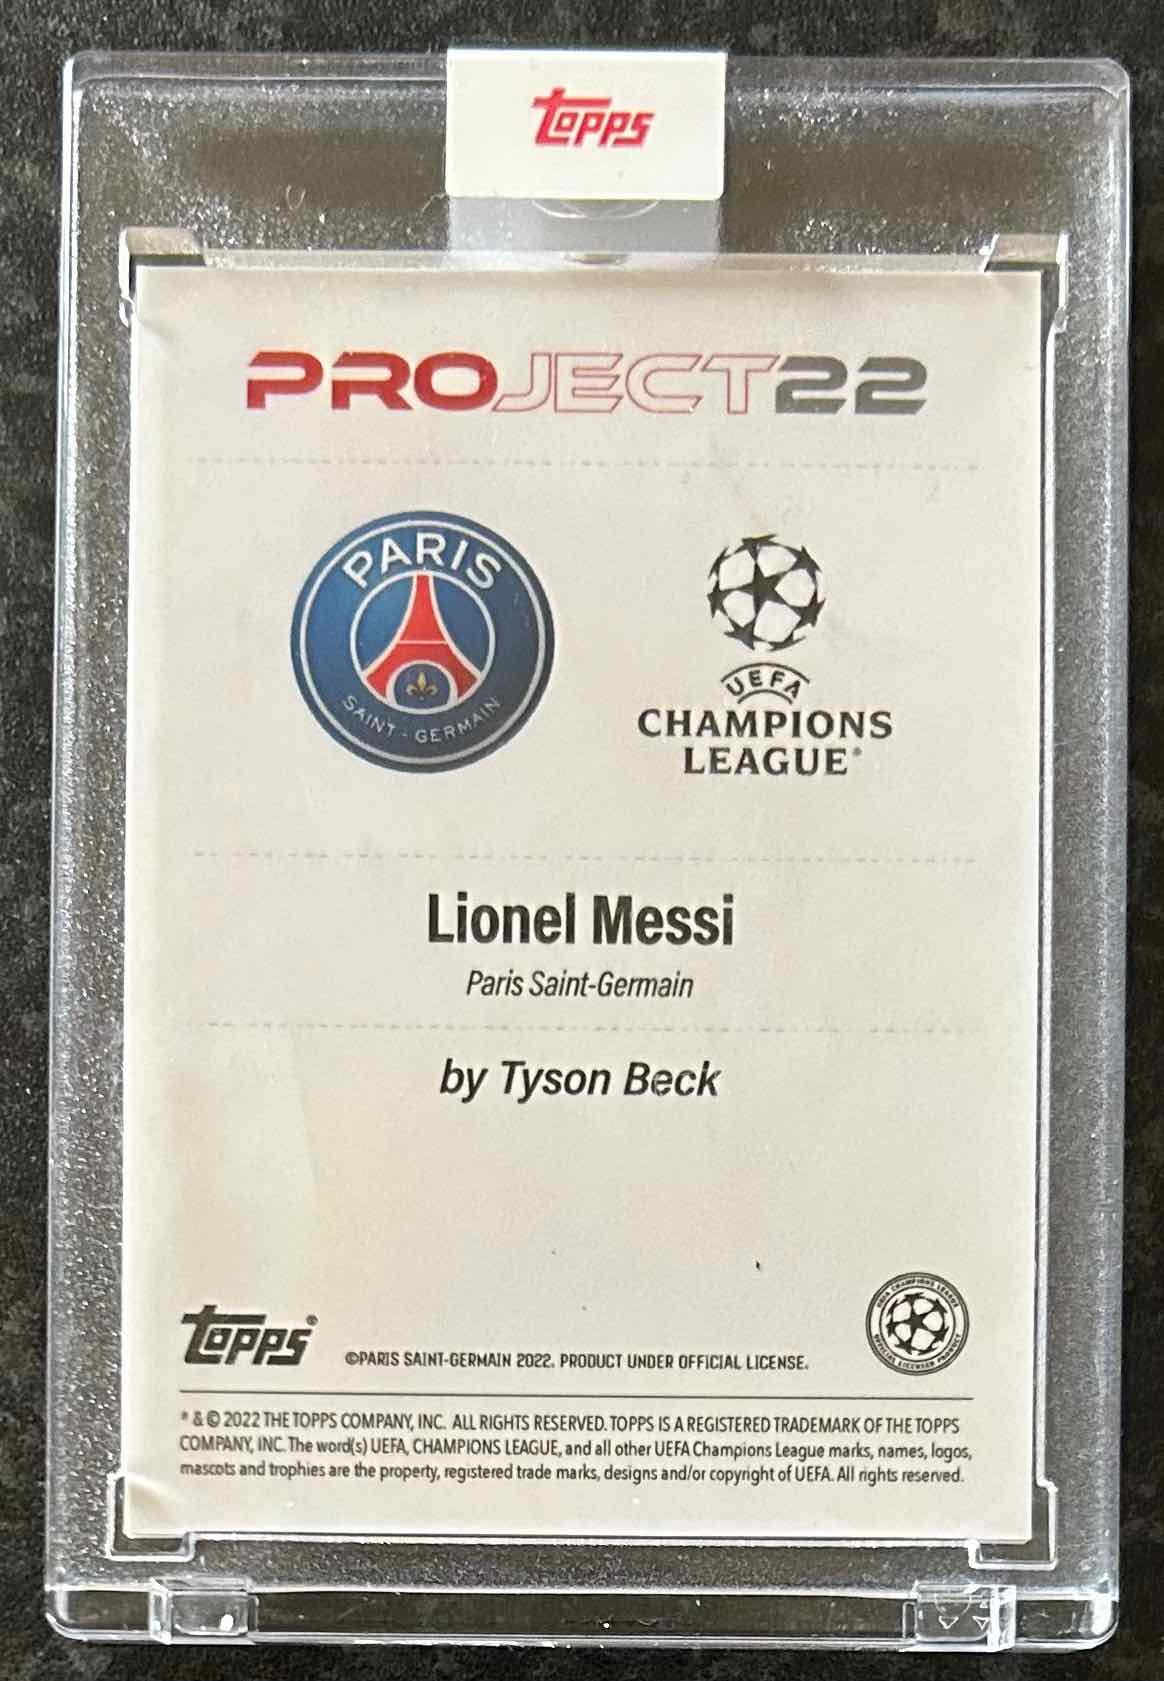 Lionel Messi (PSG) x Tyson Beck Topps Project 2022